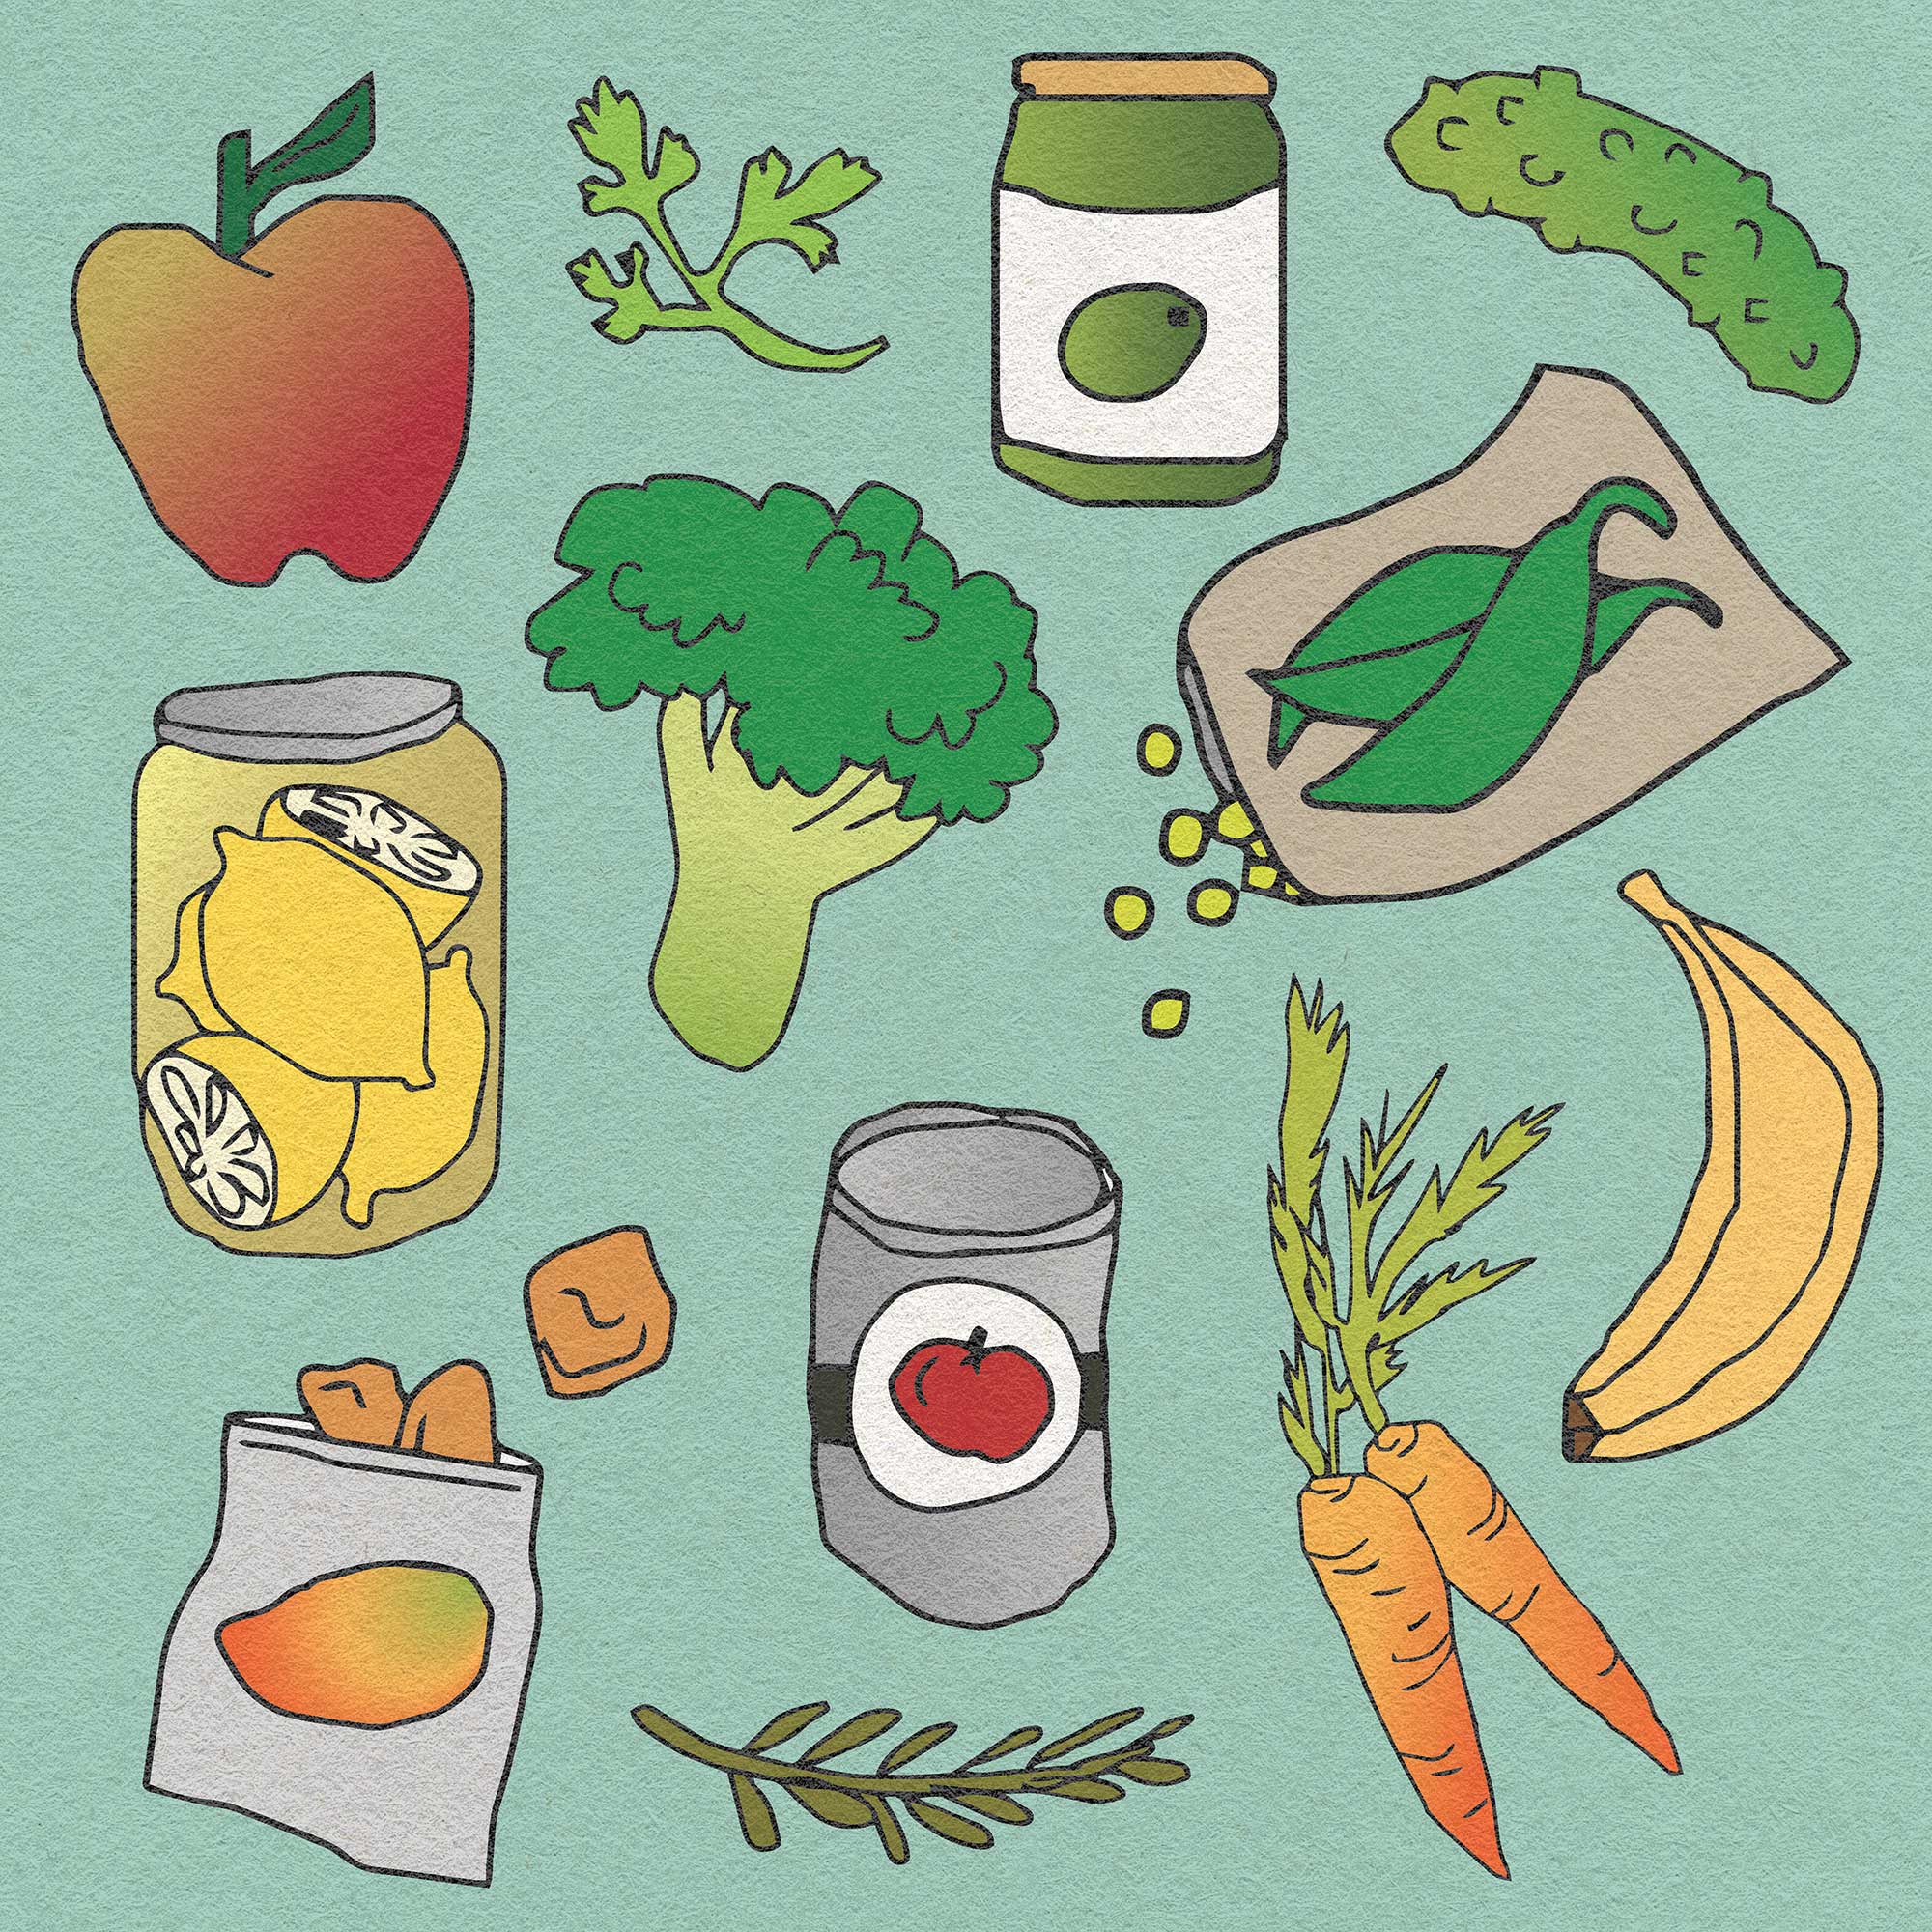 Illustration of gluten-free produce items on a green-blue background